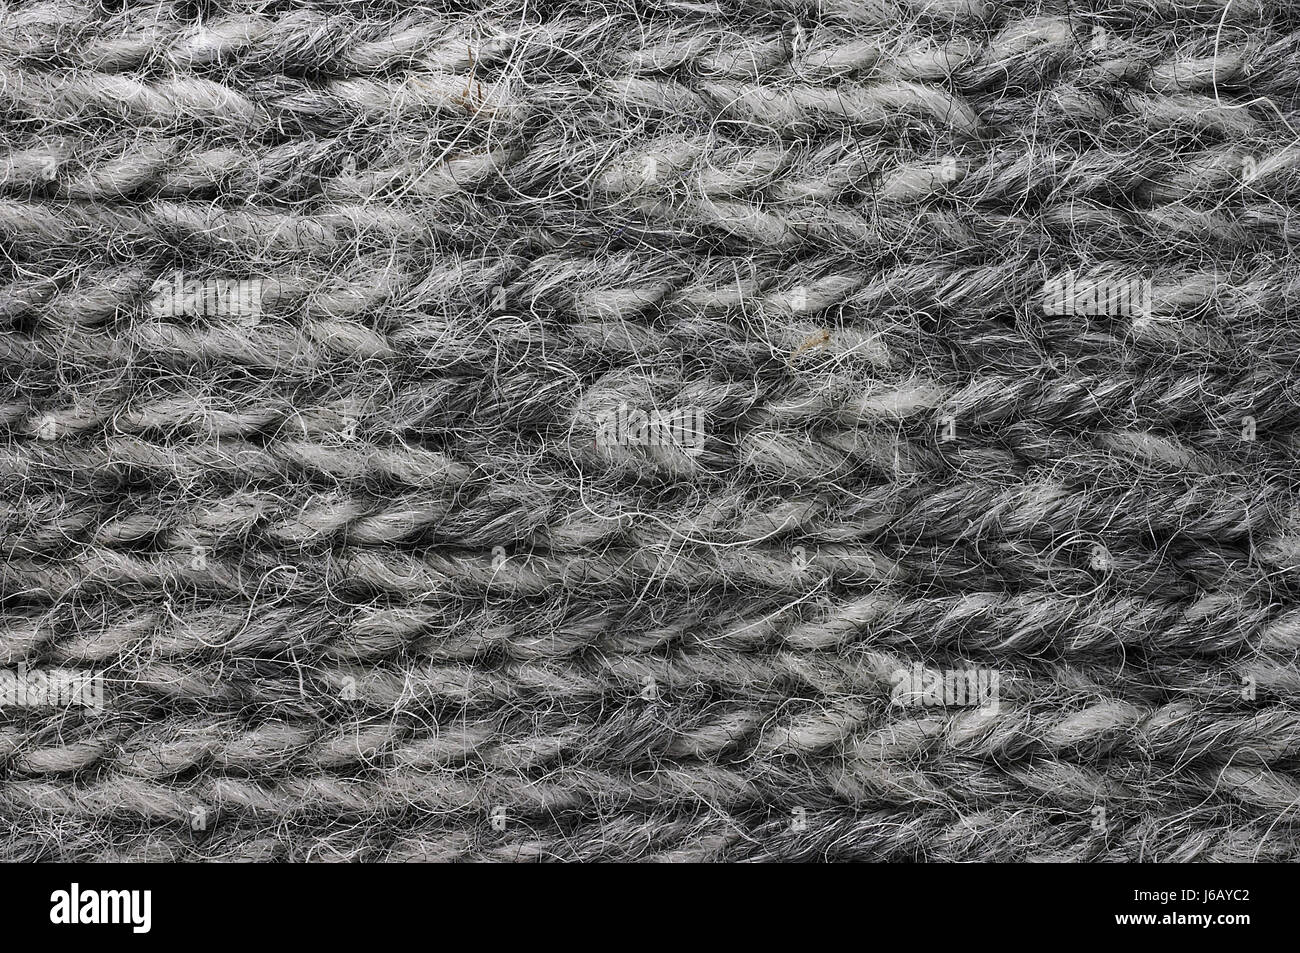 detail wool knit surface string abstract packthreads patterned pattern Stock Photo